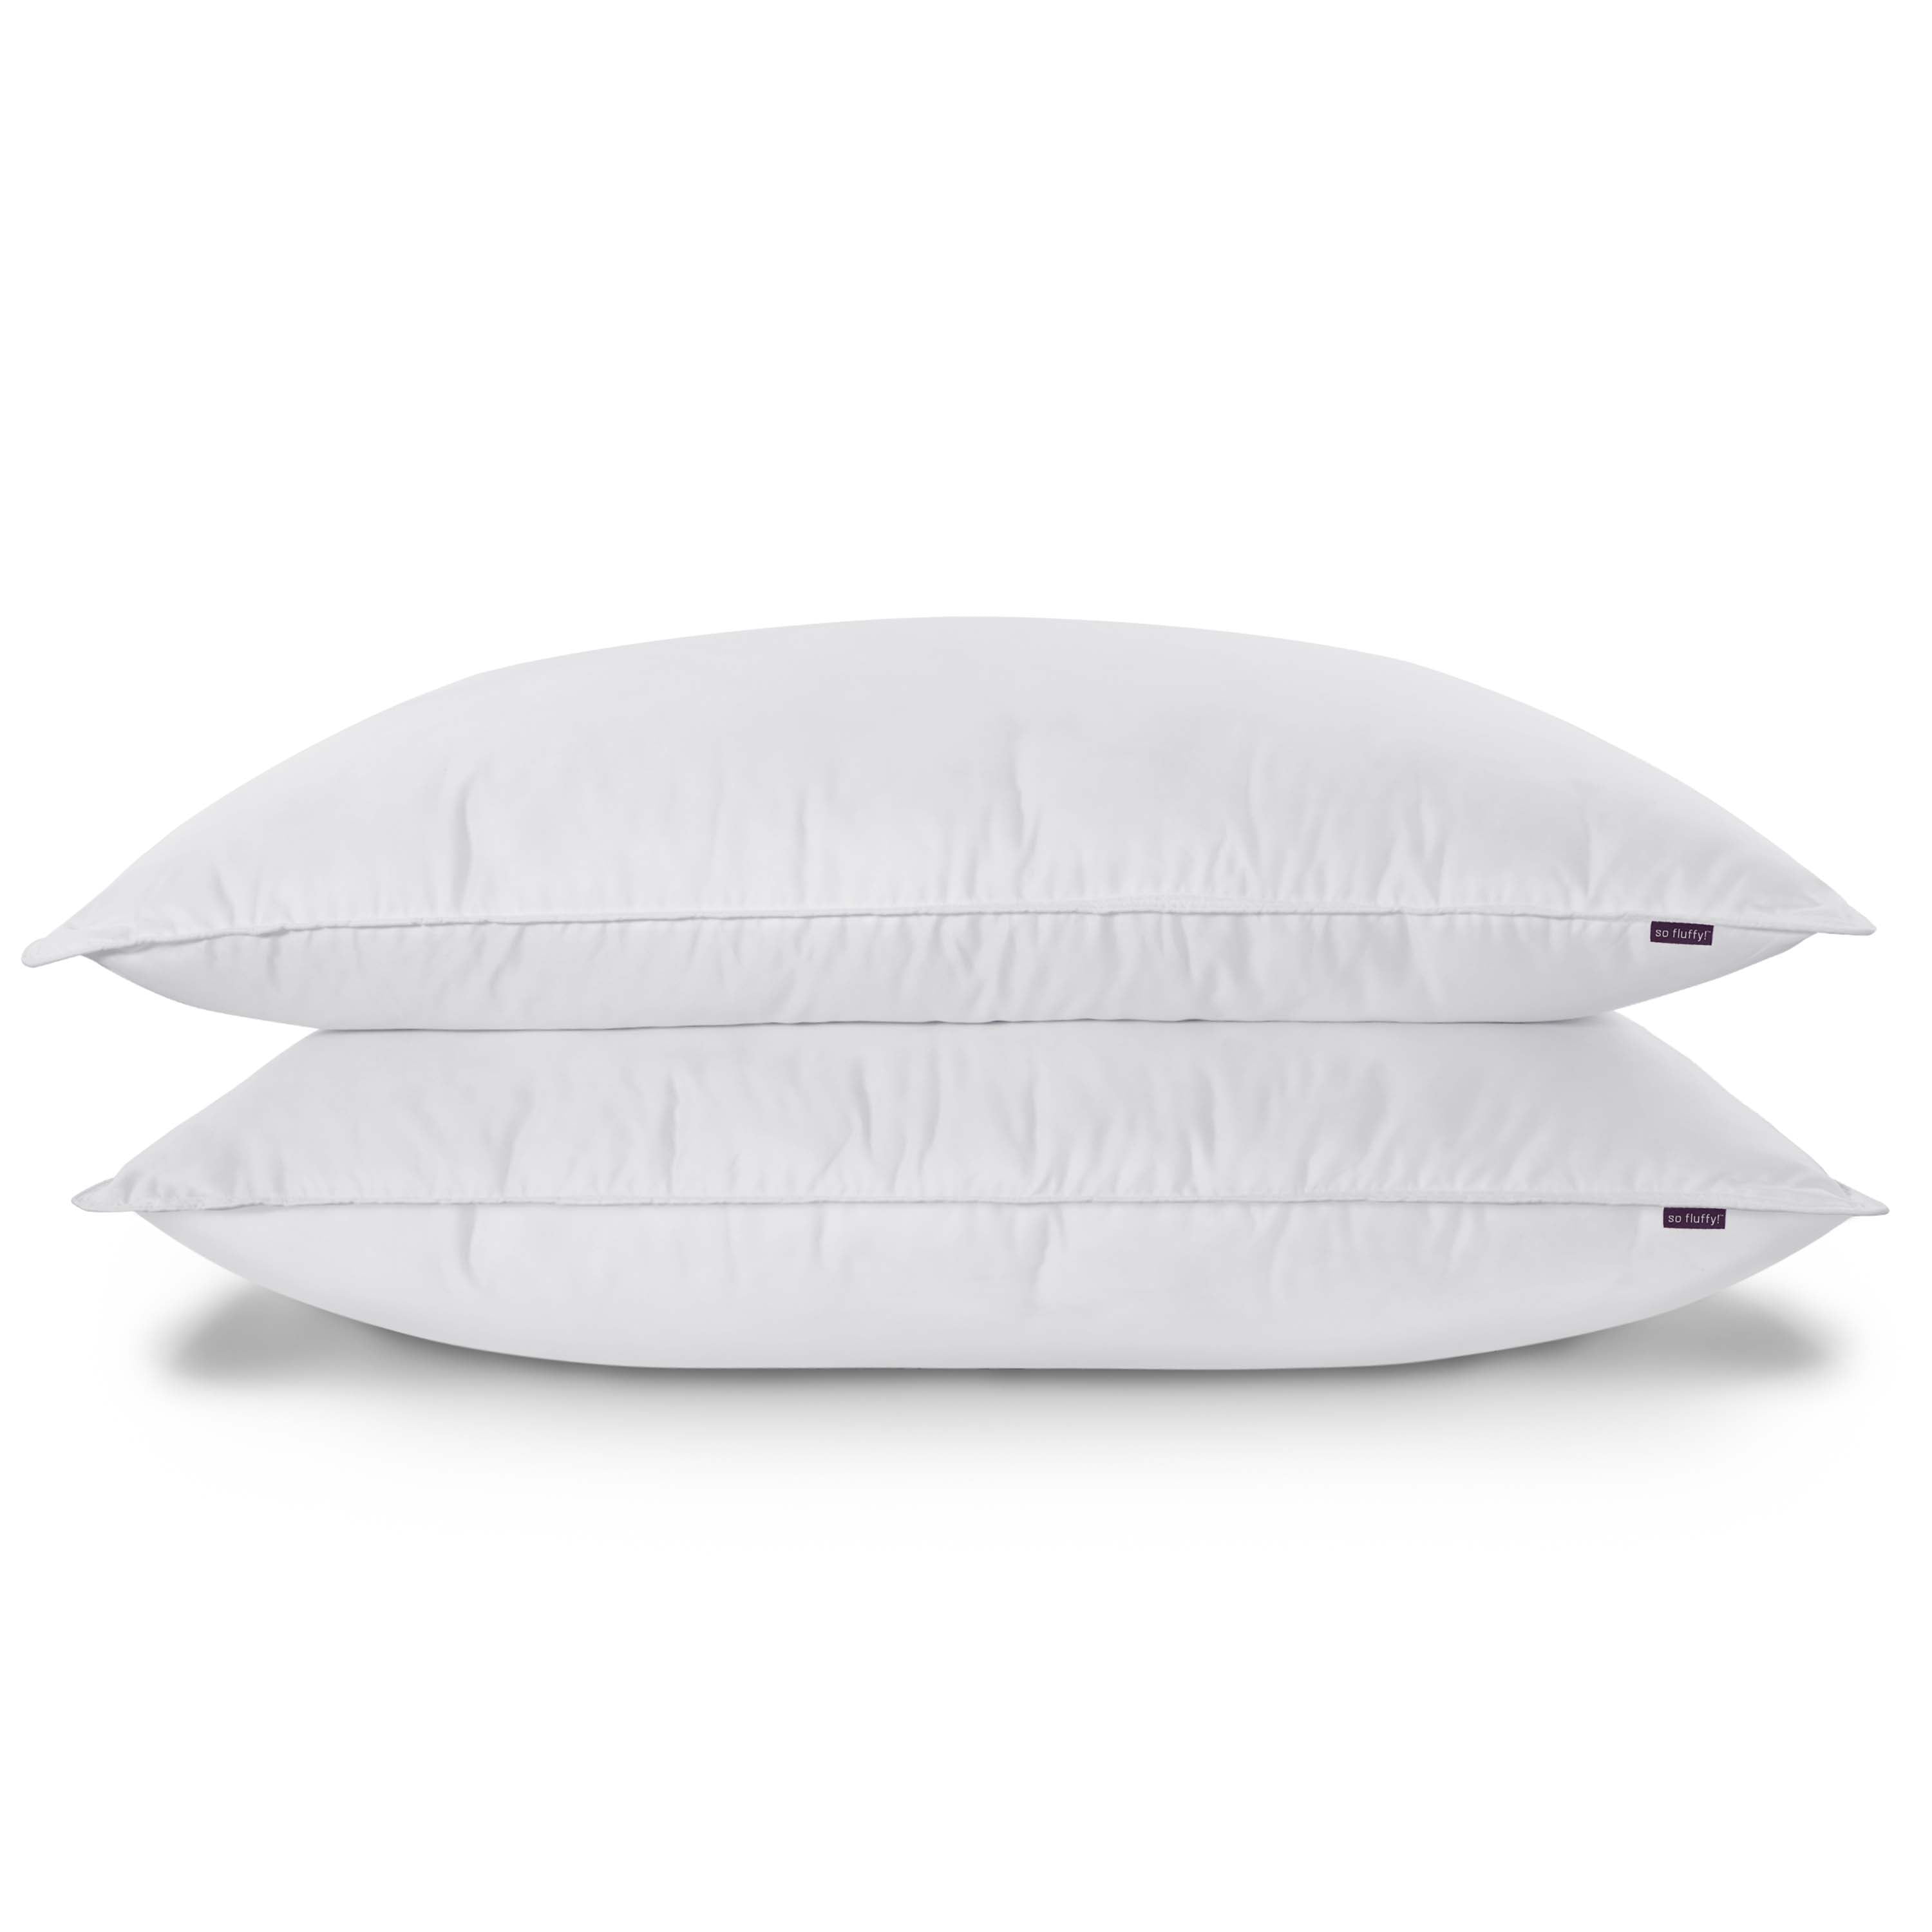 So Fluffy Feather Jumbo Bed Pillows (2 Count)